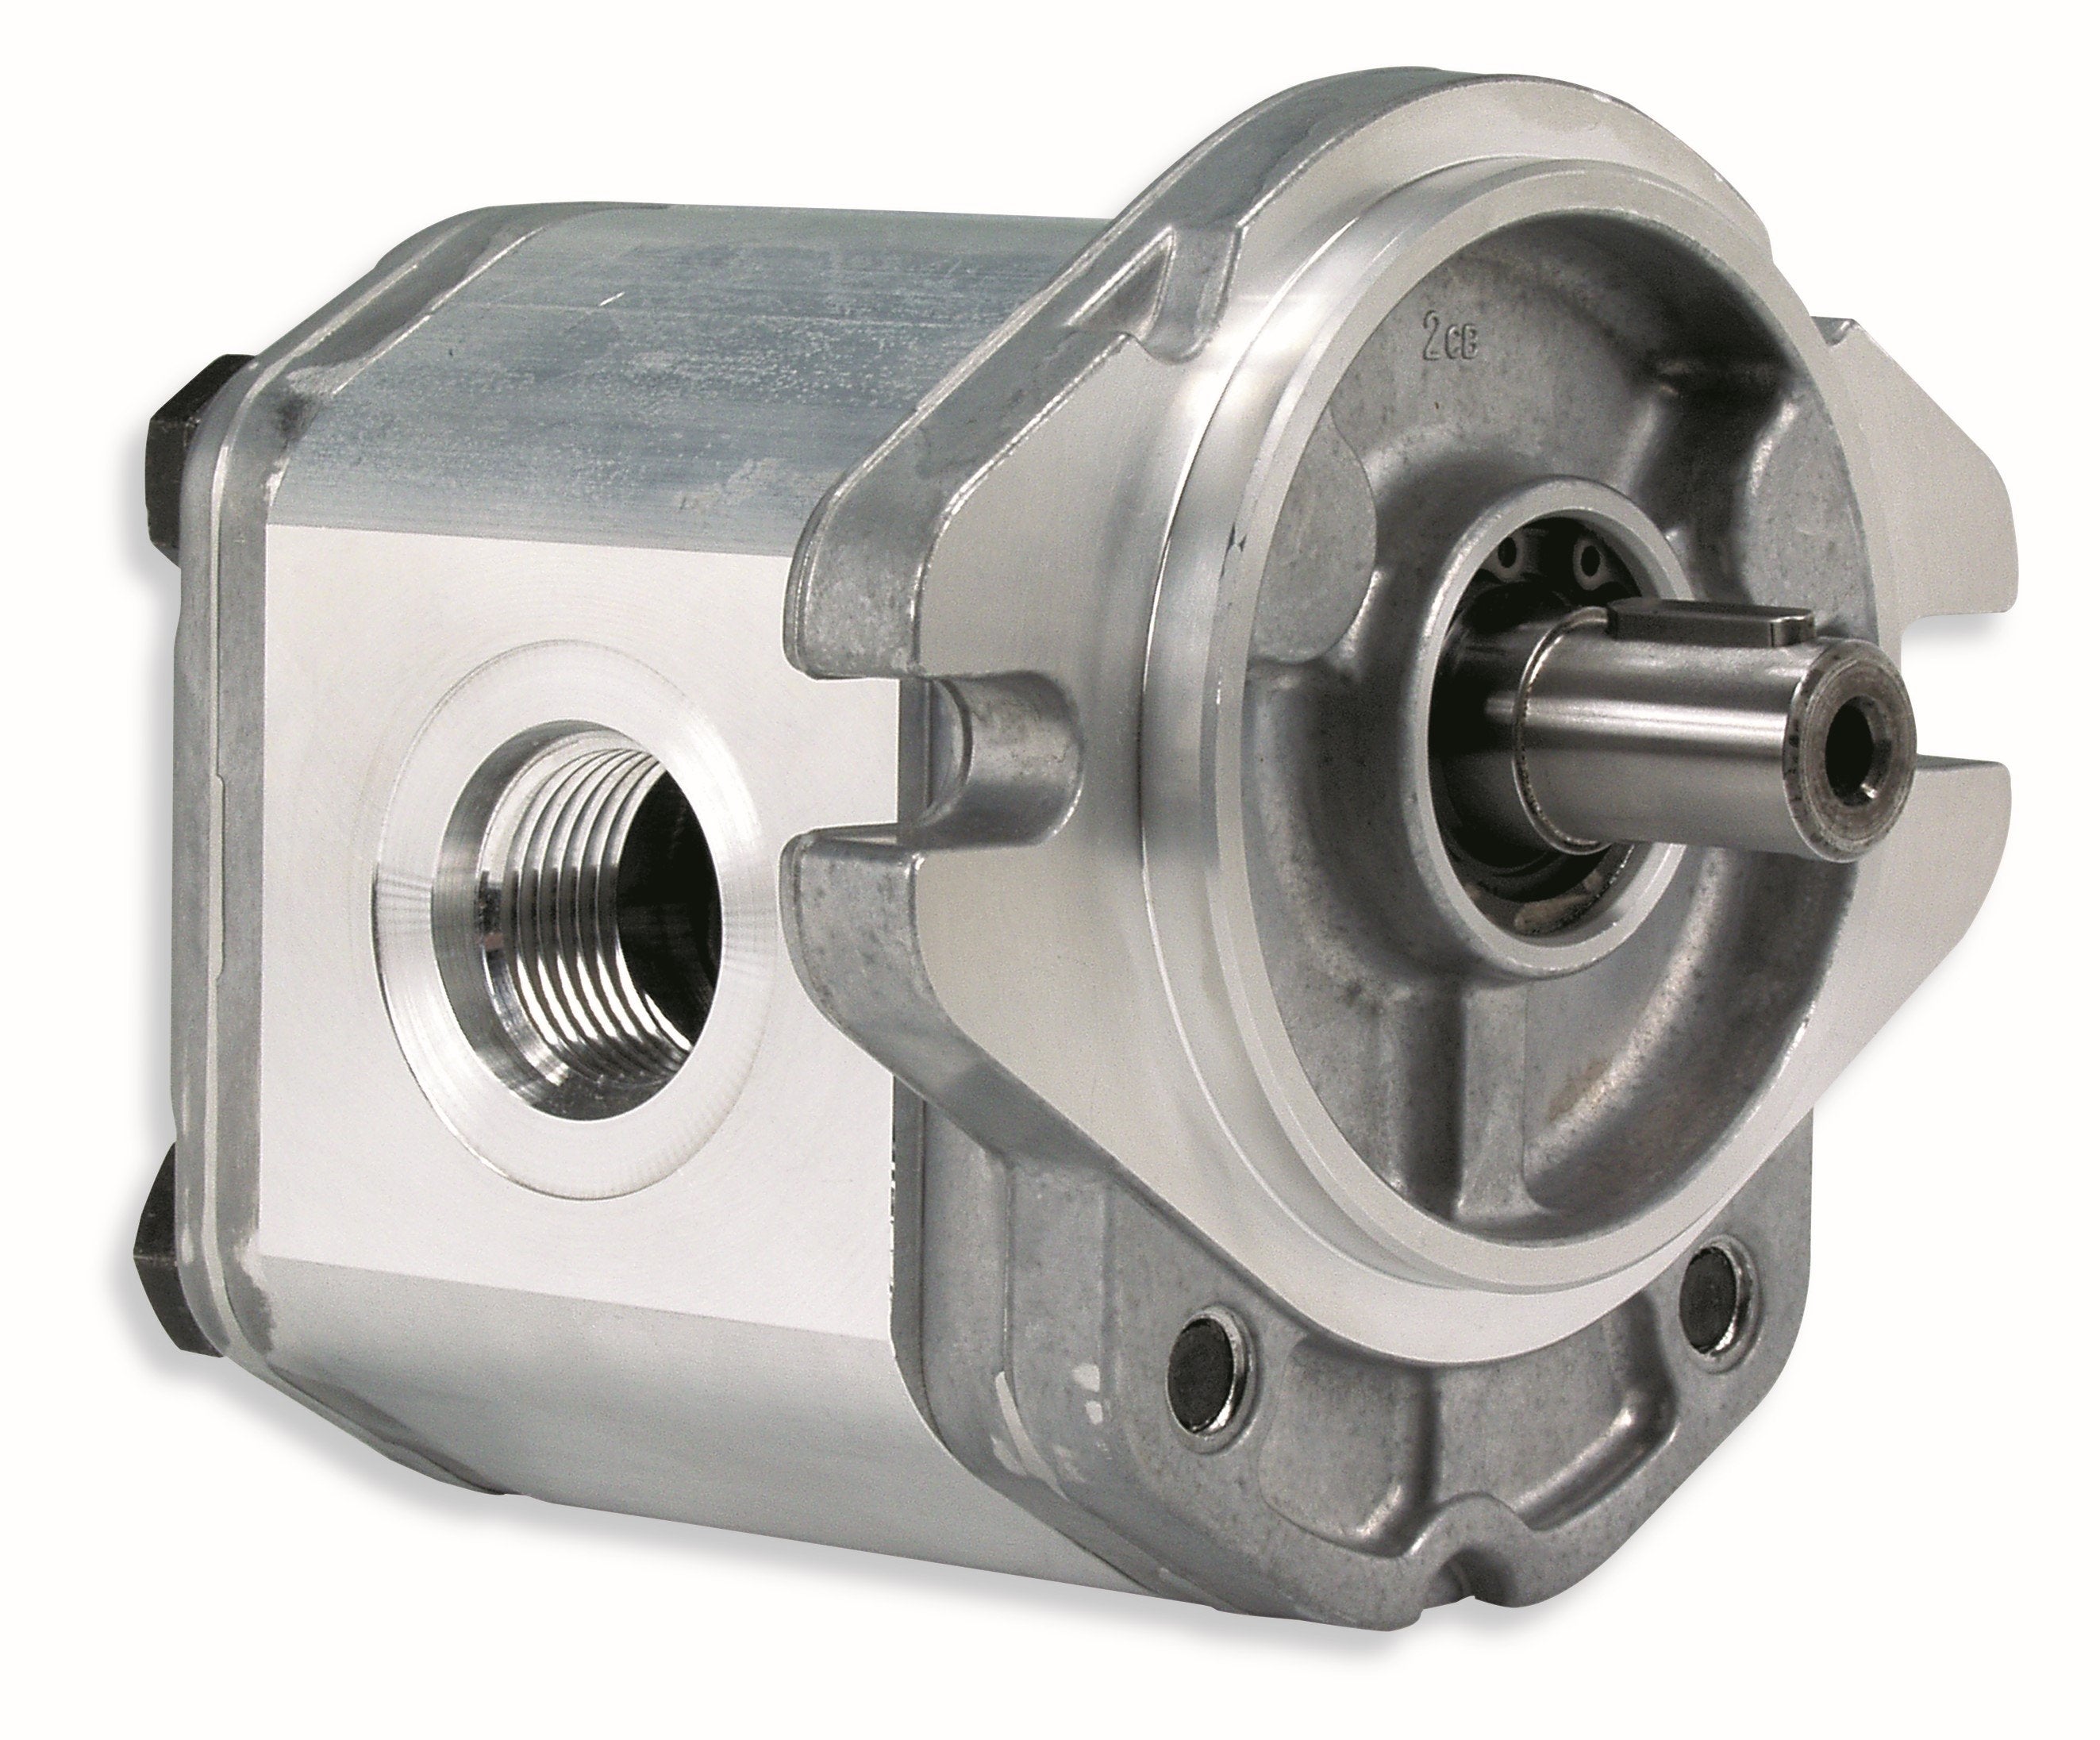 GHM3A-R-40-S1-FA-E4 : Marzocchi Gear Motor, Bidirectional, 26cc, 4060psi rated, 3300RPM, 1" #16 SAE ports, 13T 16/32DP Splined Shaft